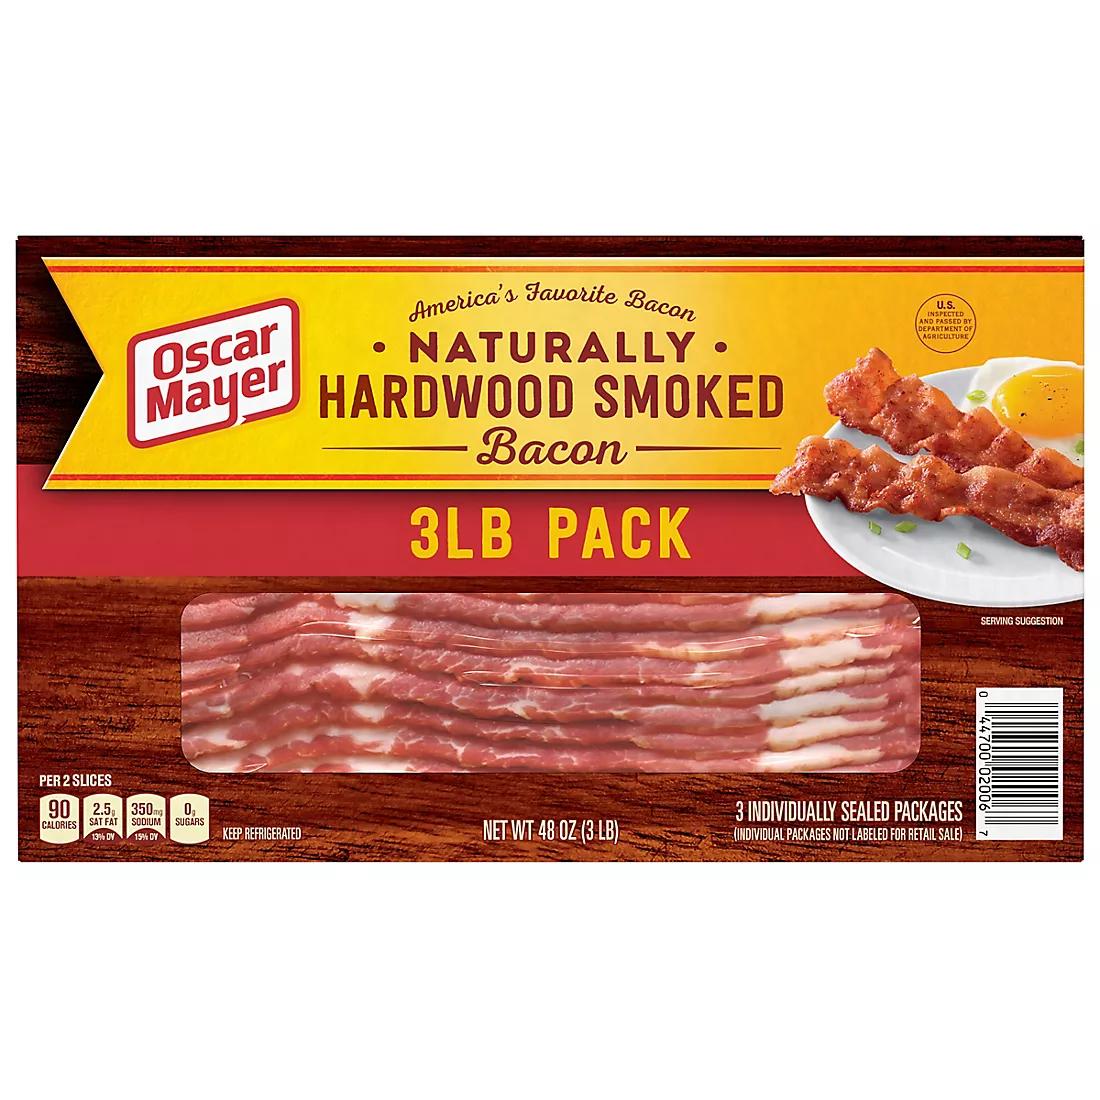 oscar mayer smoked bacon - What are the ingredients in Oscar Mayer hardwood smoked bacon